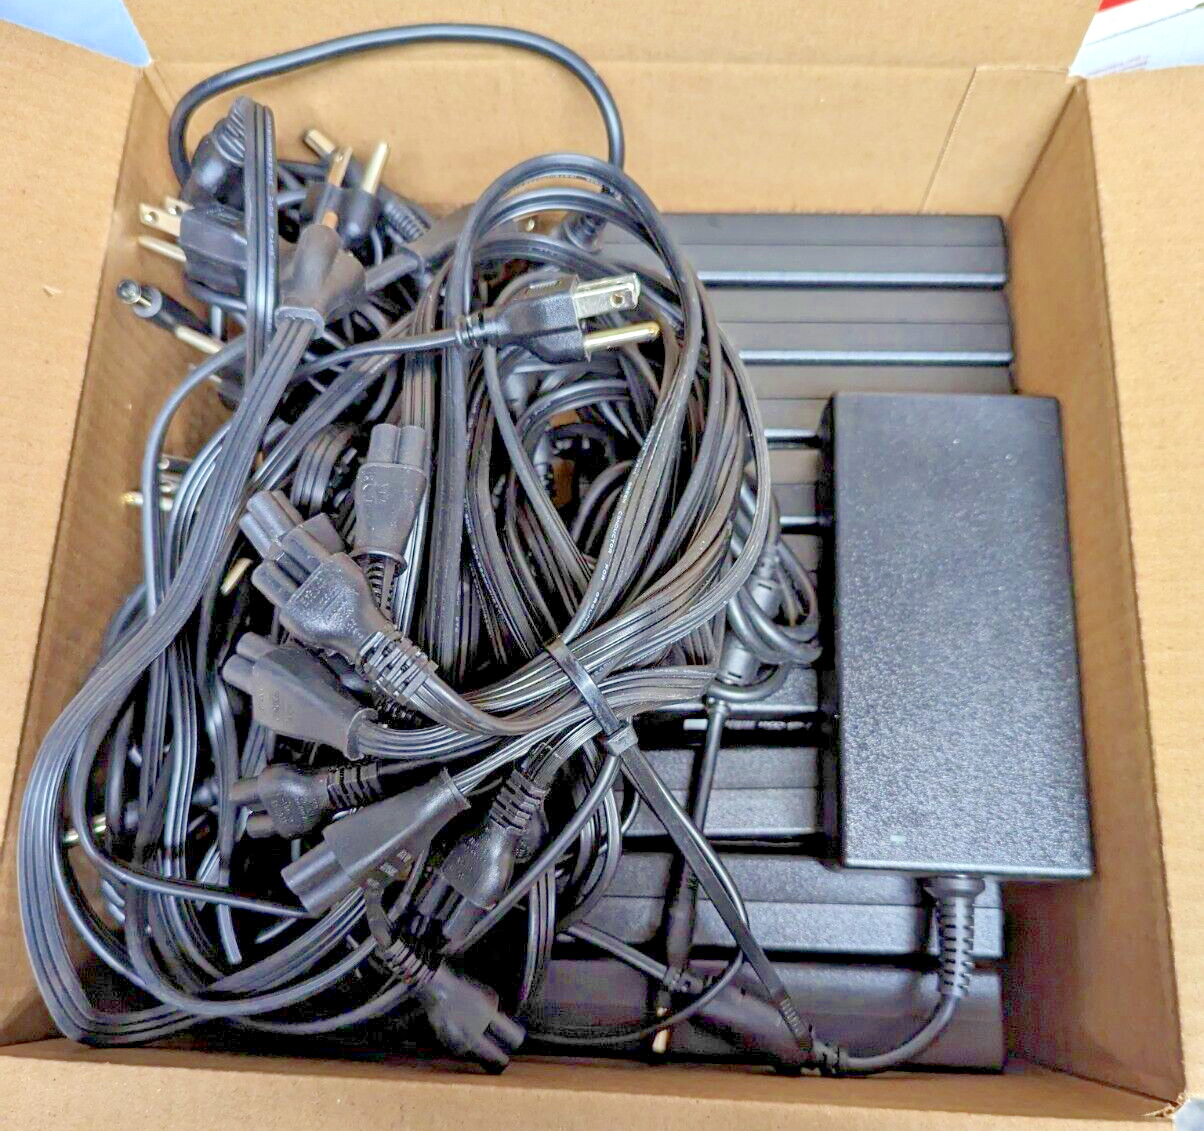 Lot of 10 Genuine OEM Dell 180W AC Adapter Charger 19.5V 9.23A for Docks WD19 TB